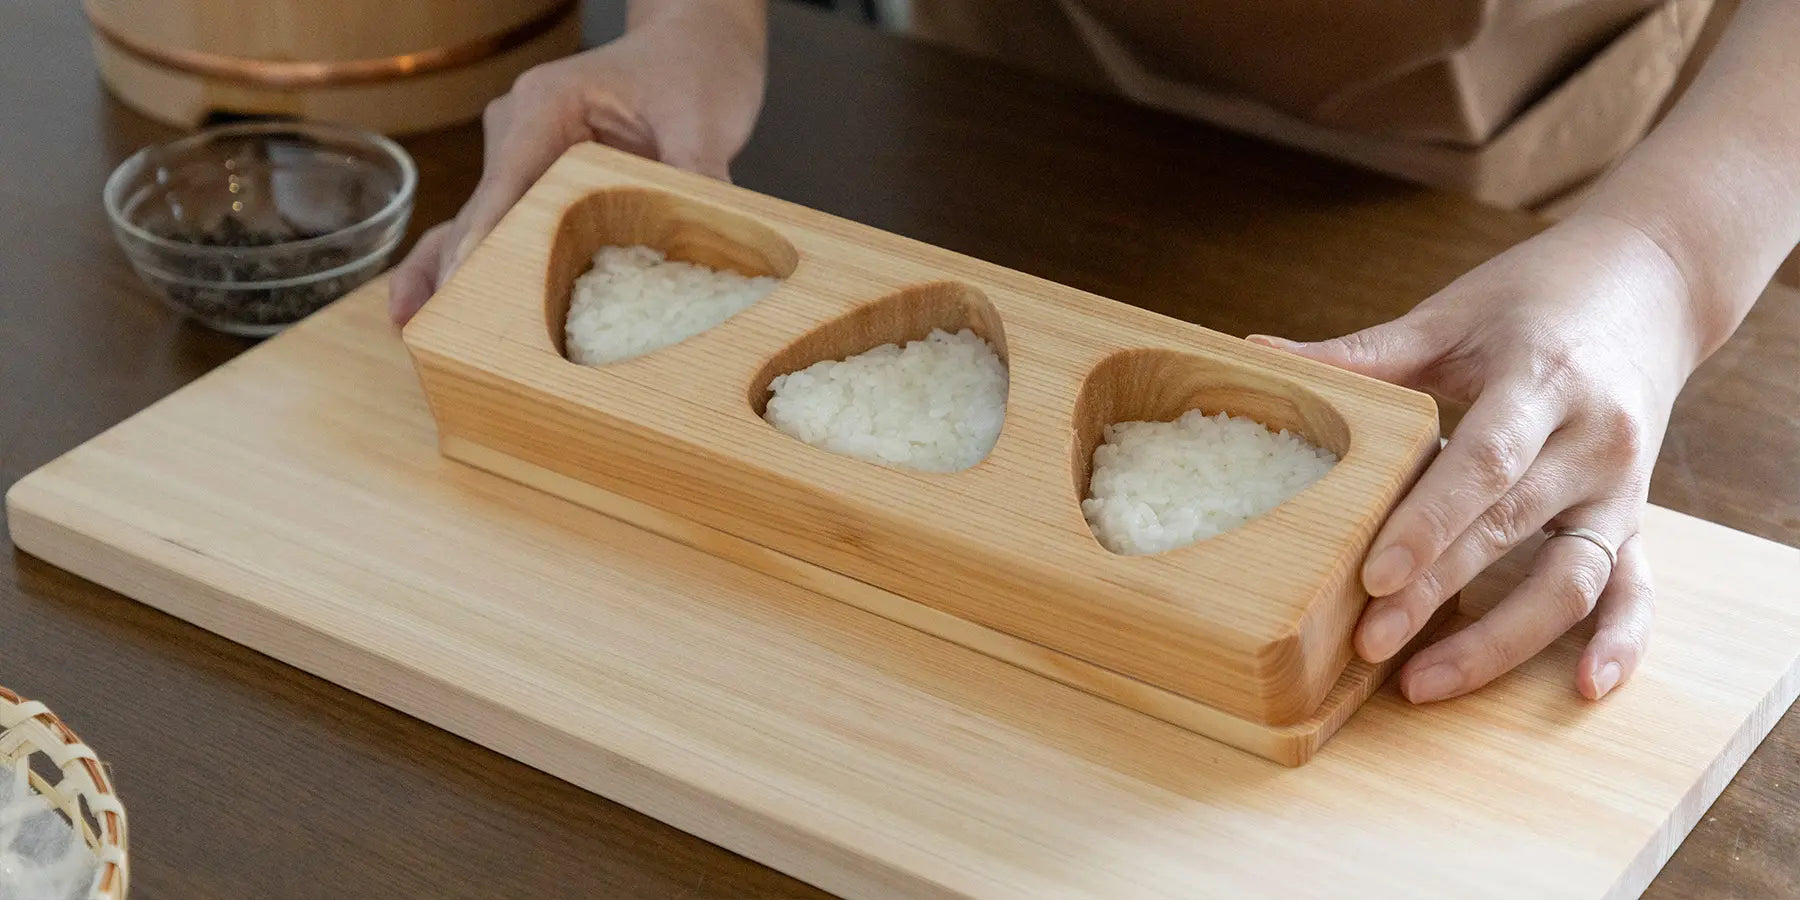 Discover our great selection of Kitchen Molds at Globalkitchen Japan.